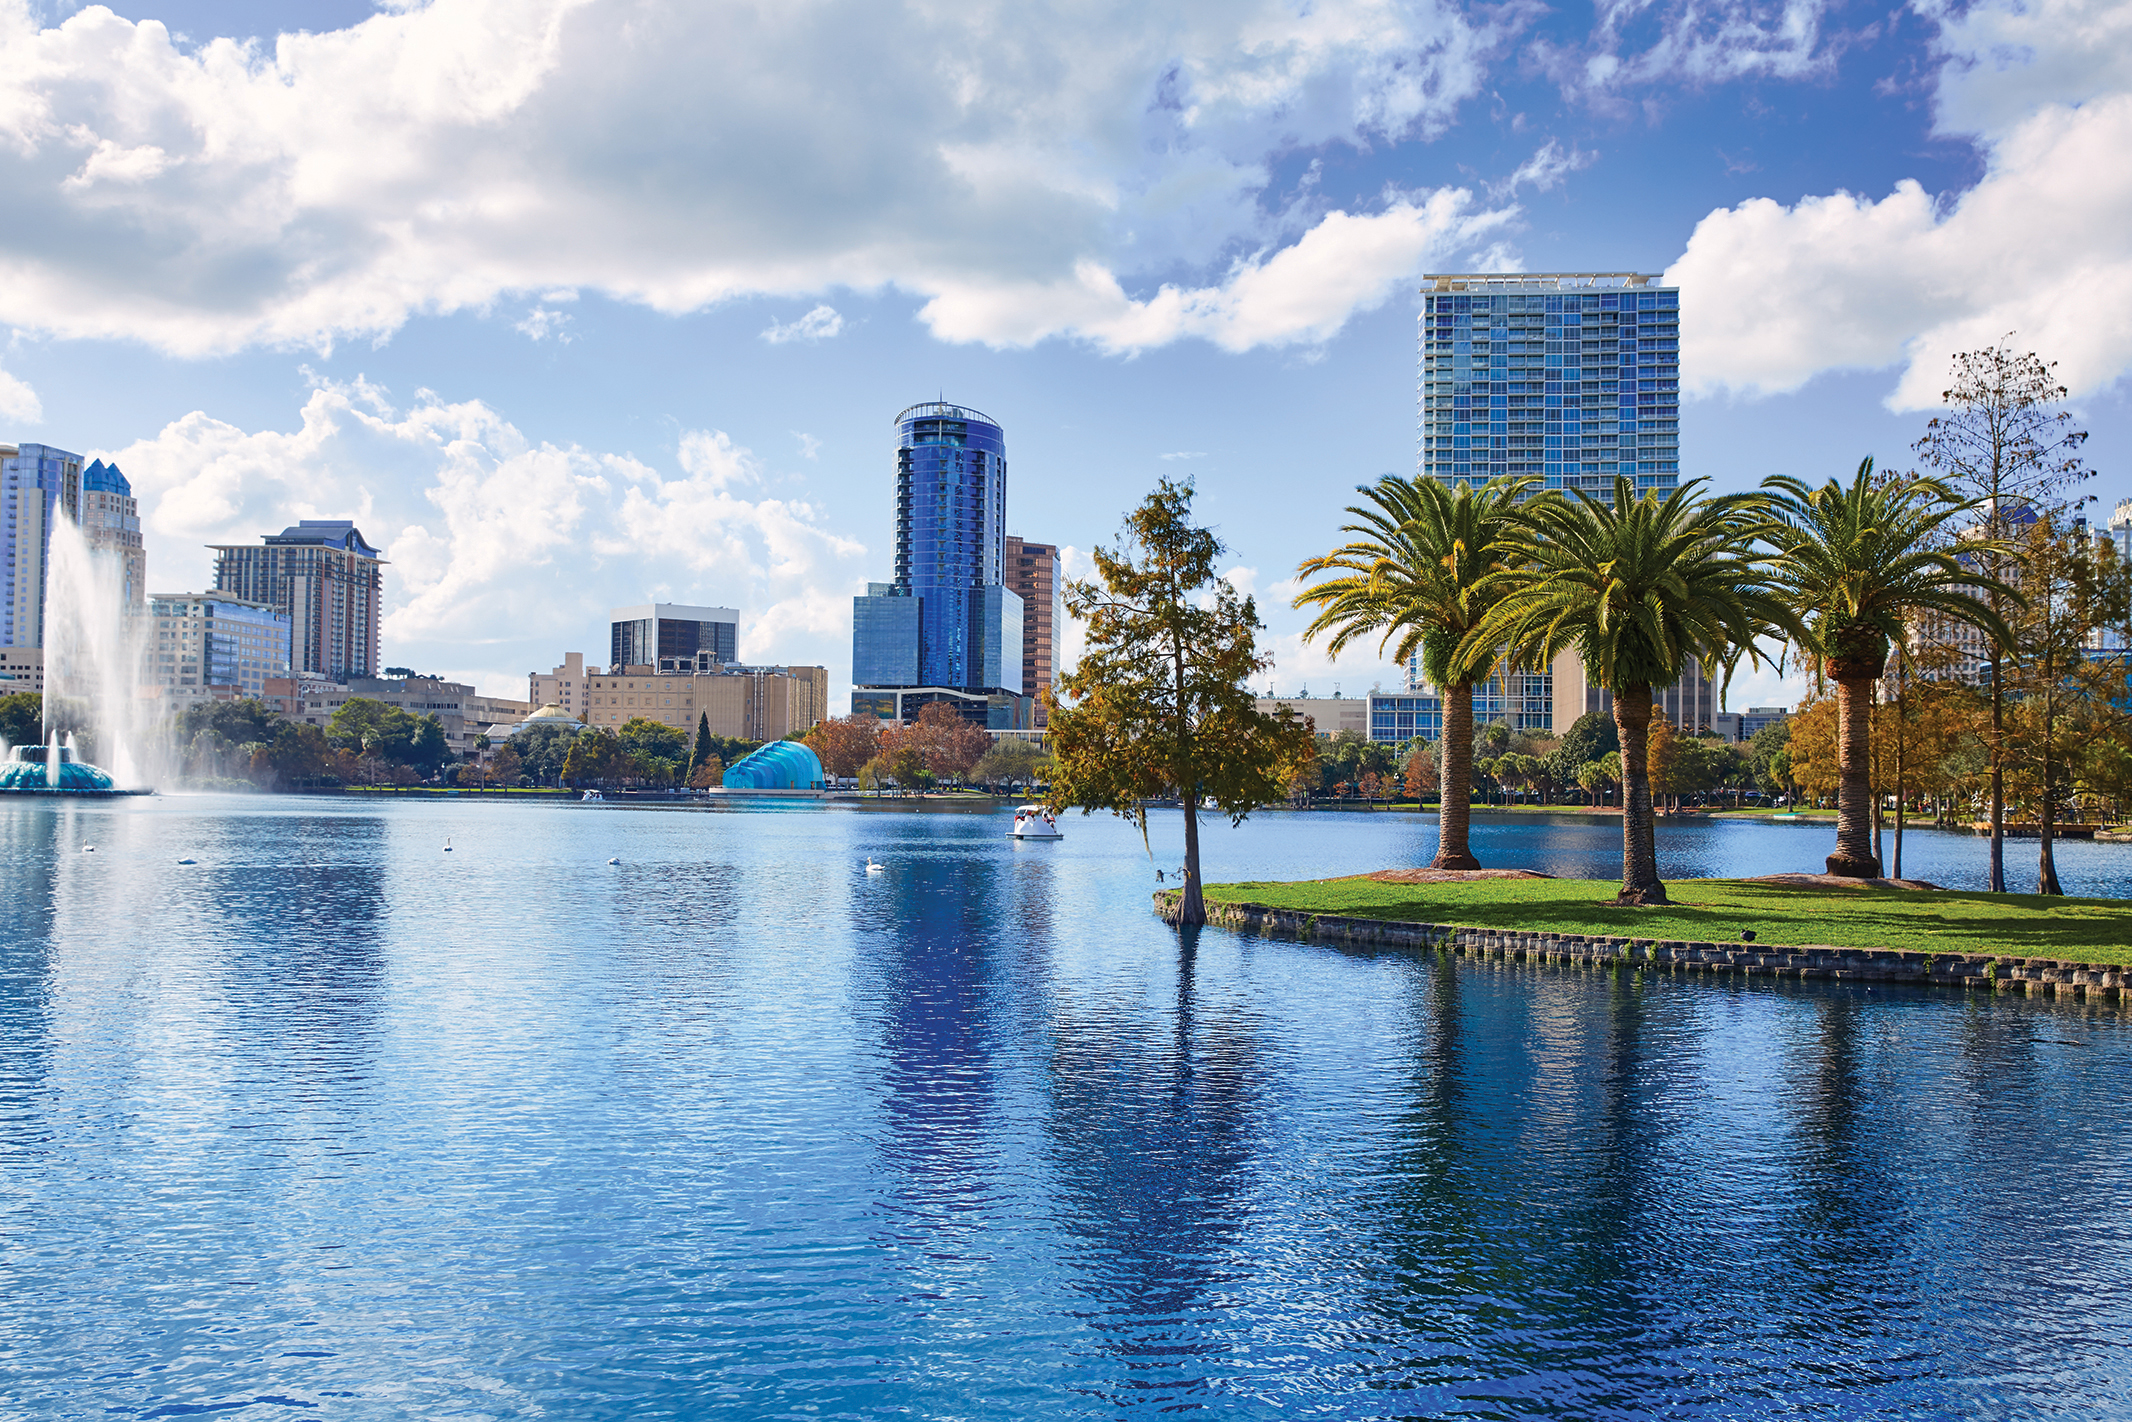 Water and palm trees in Orlando, Florida